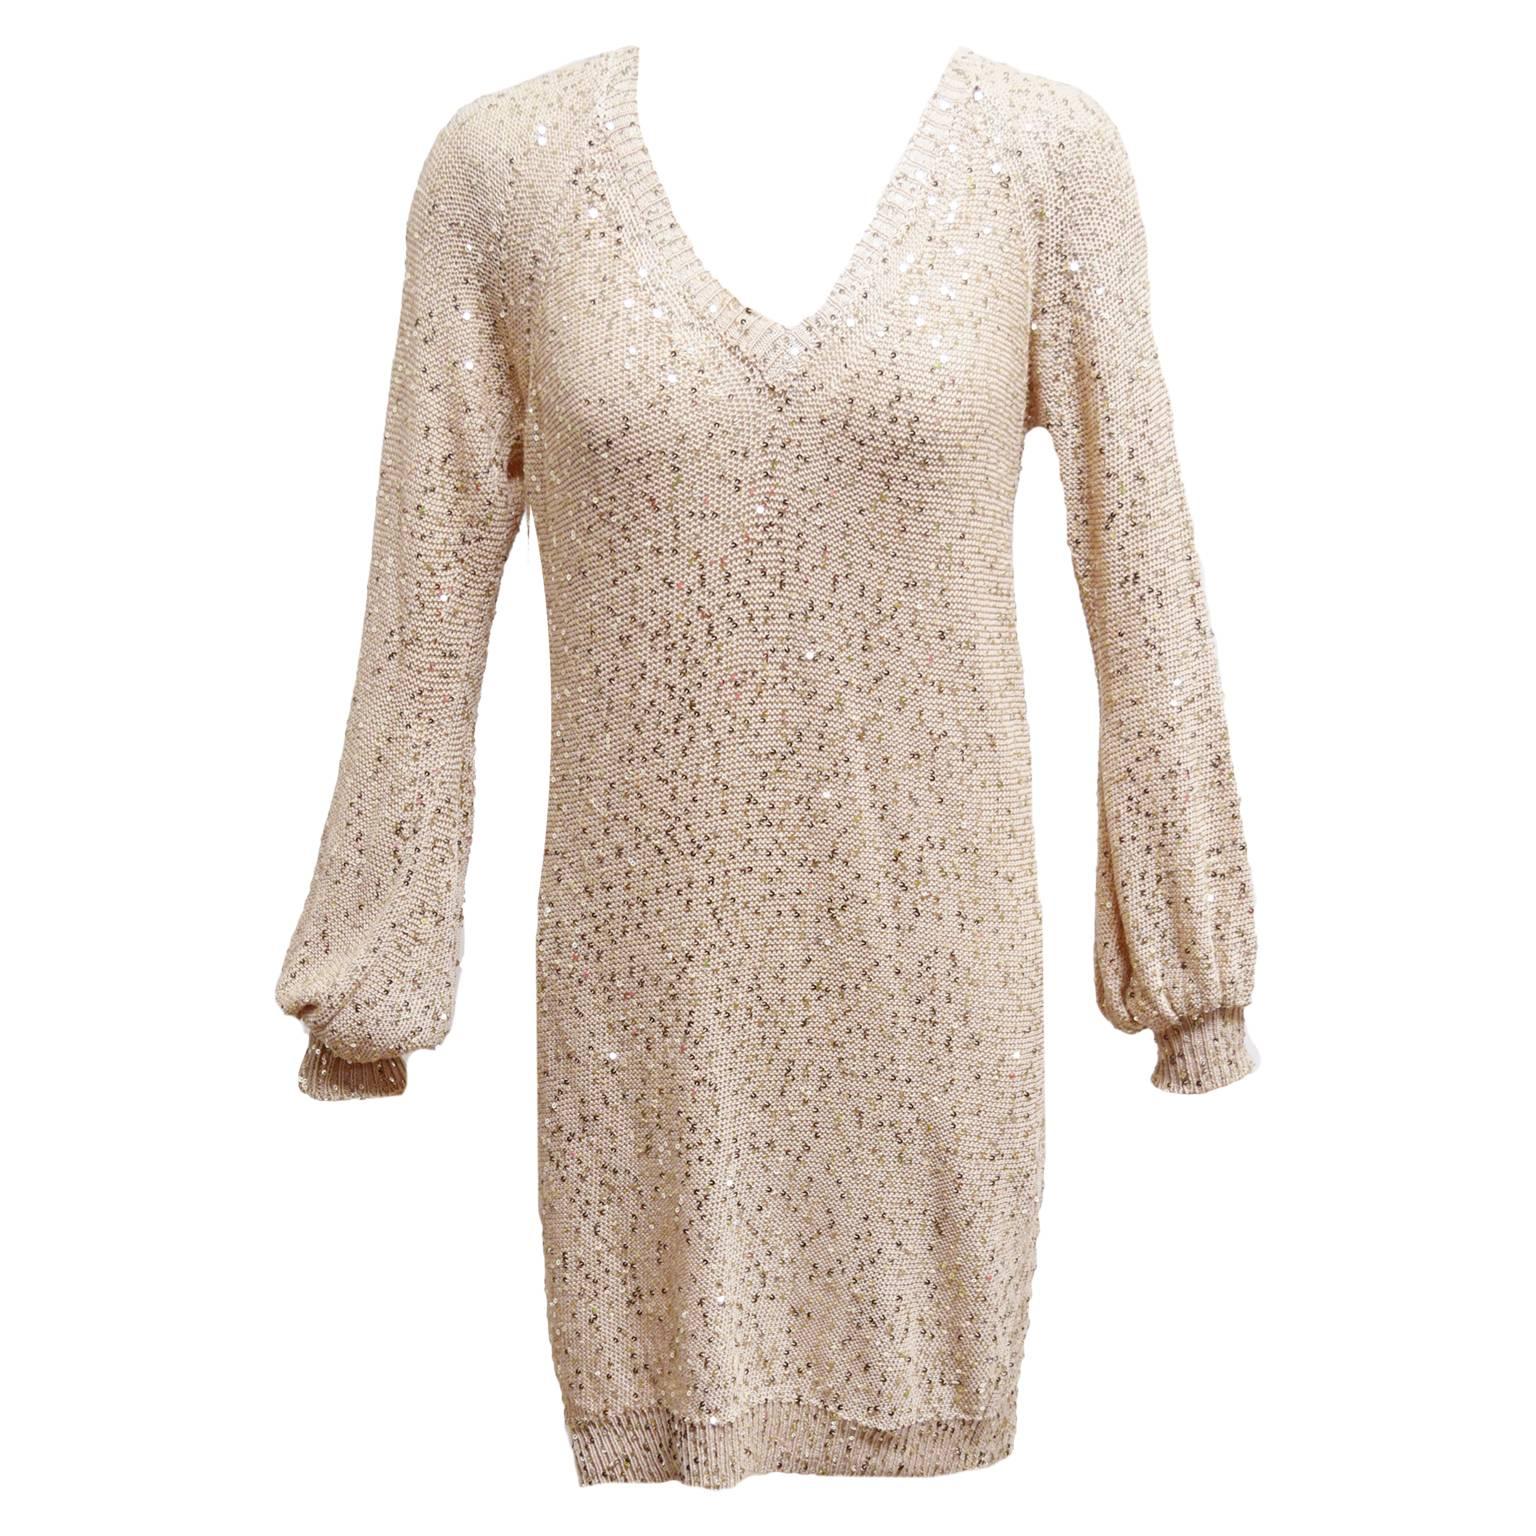  Stella McCartney Blush Sweater Dress with Sequin Embellishments For Sale